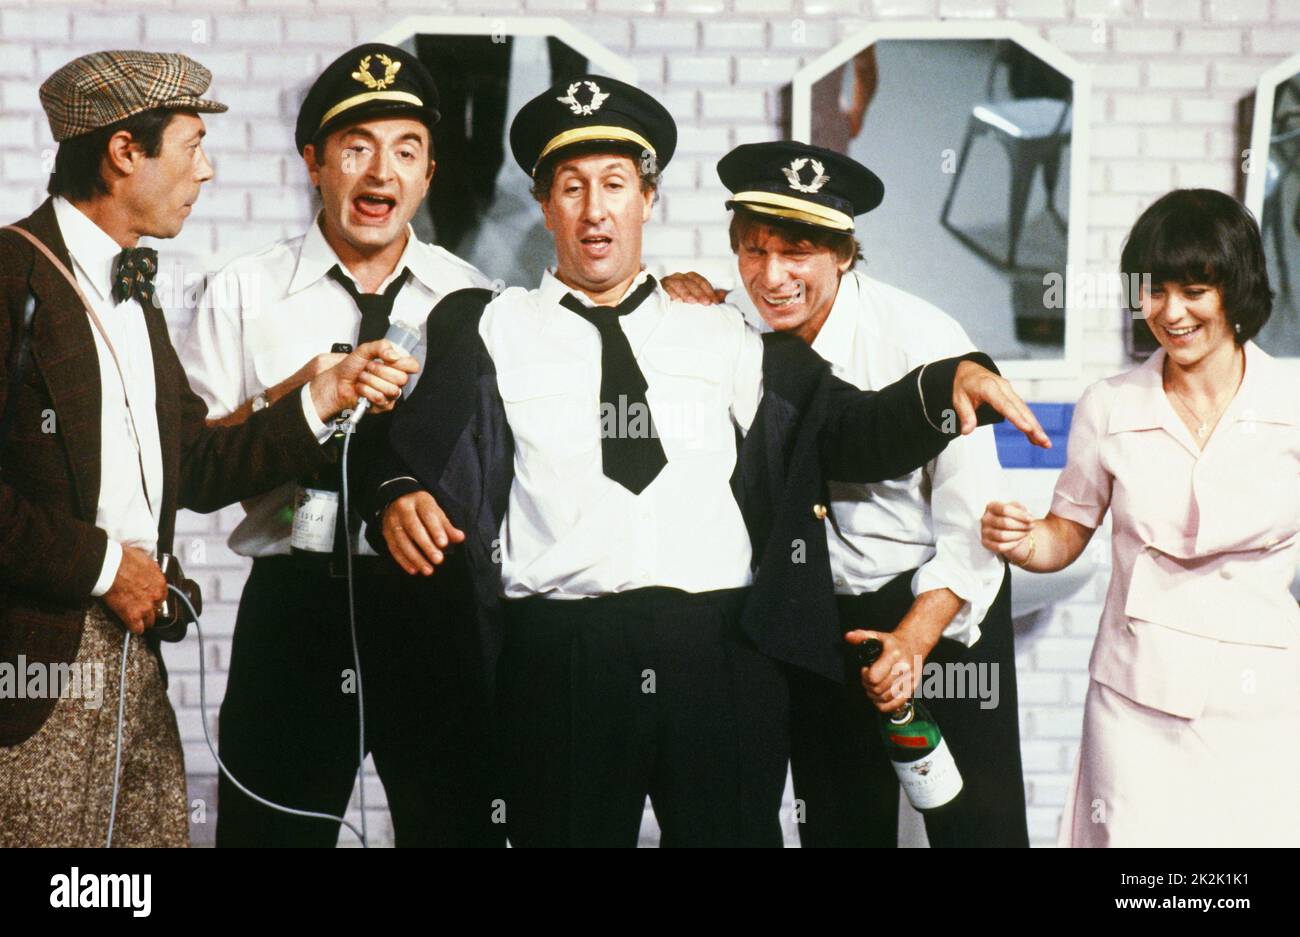 Philippe Bruneau, Guy Montagné, Stéphane Collaro and Alain Scoff in a 'Vidéo-flic' sketch in the comedy TV show 'Cocoricocoboy', in 1986. Stock Photo